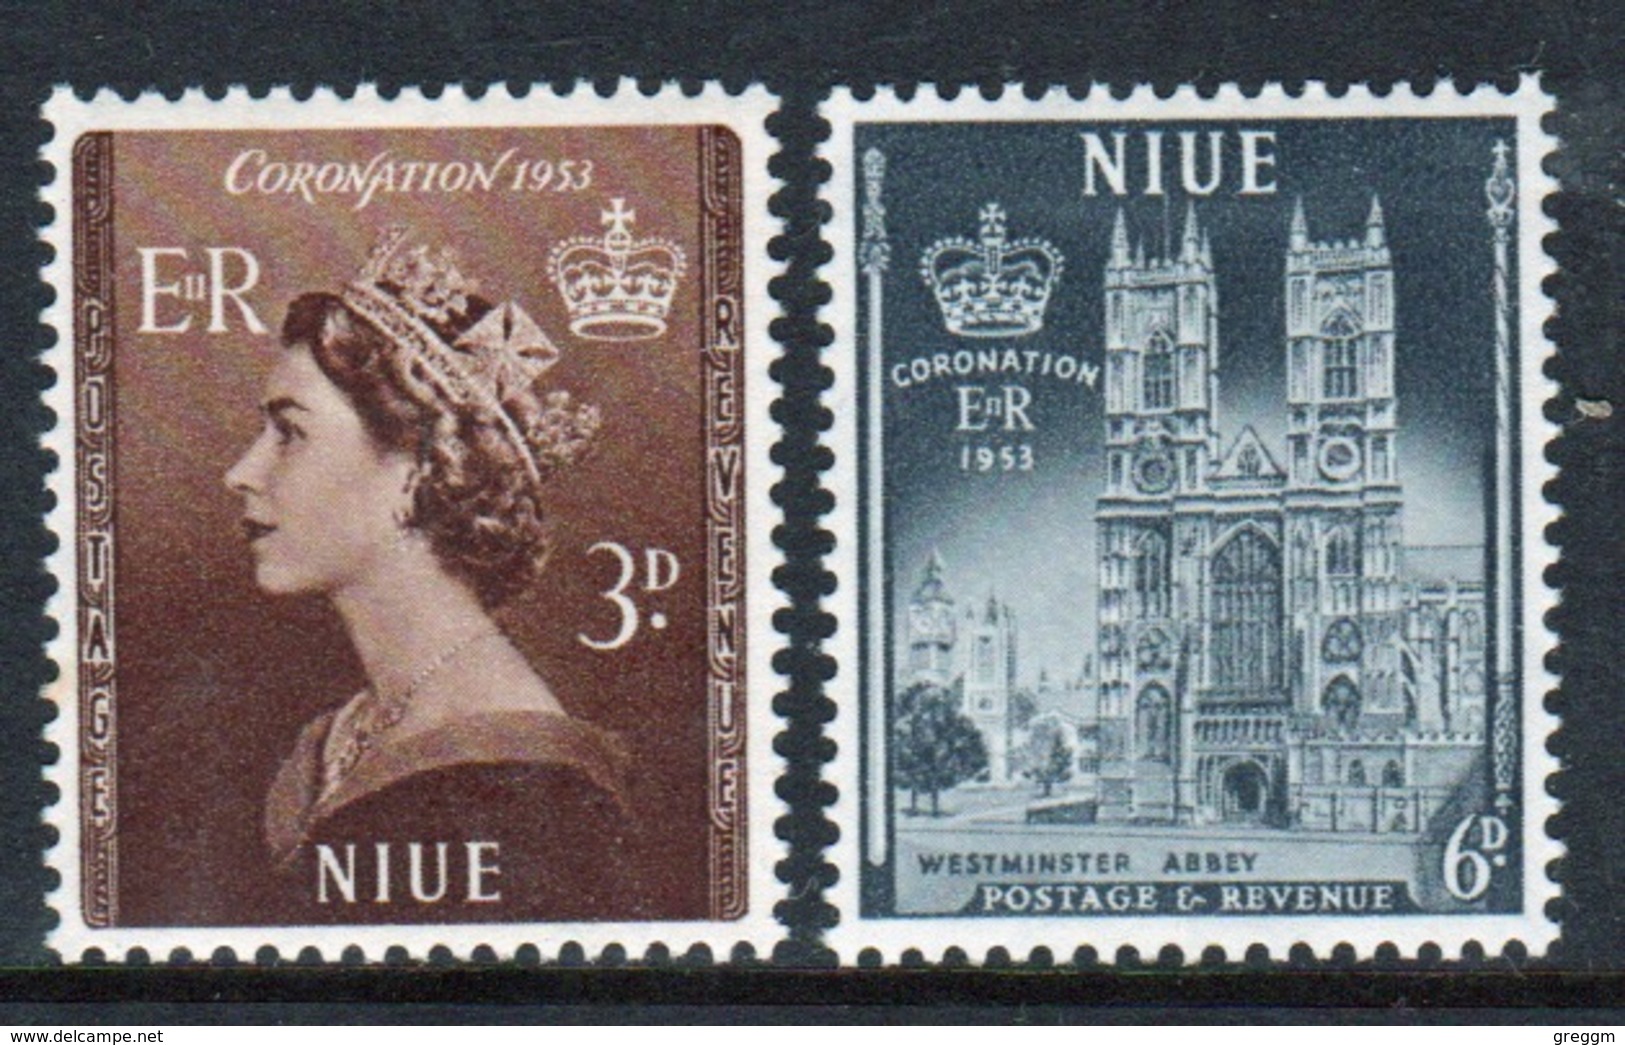 Niue Set Of Stamps Issued To Celebrate The 1953 Coronation. - Niue